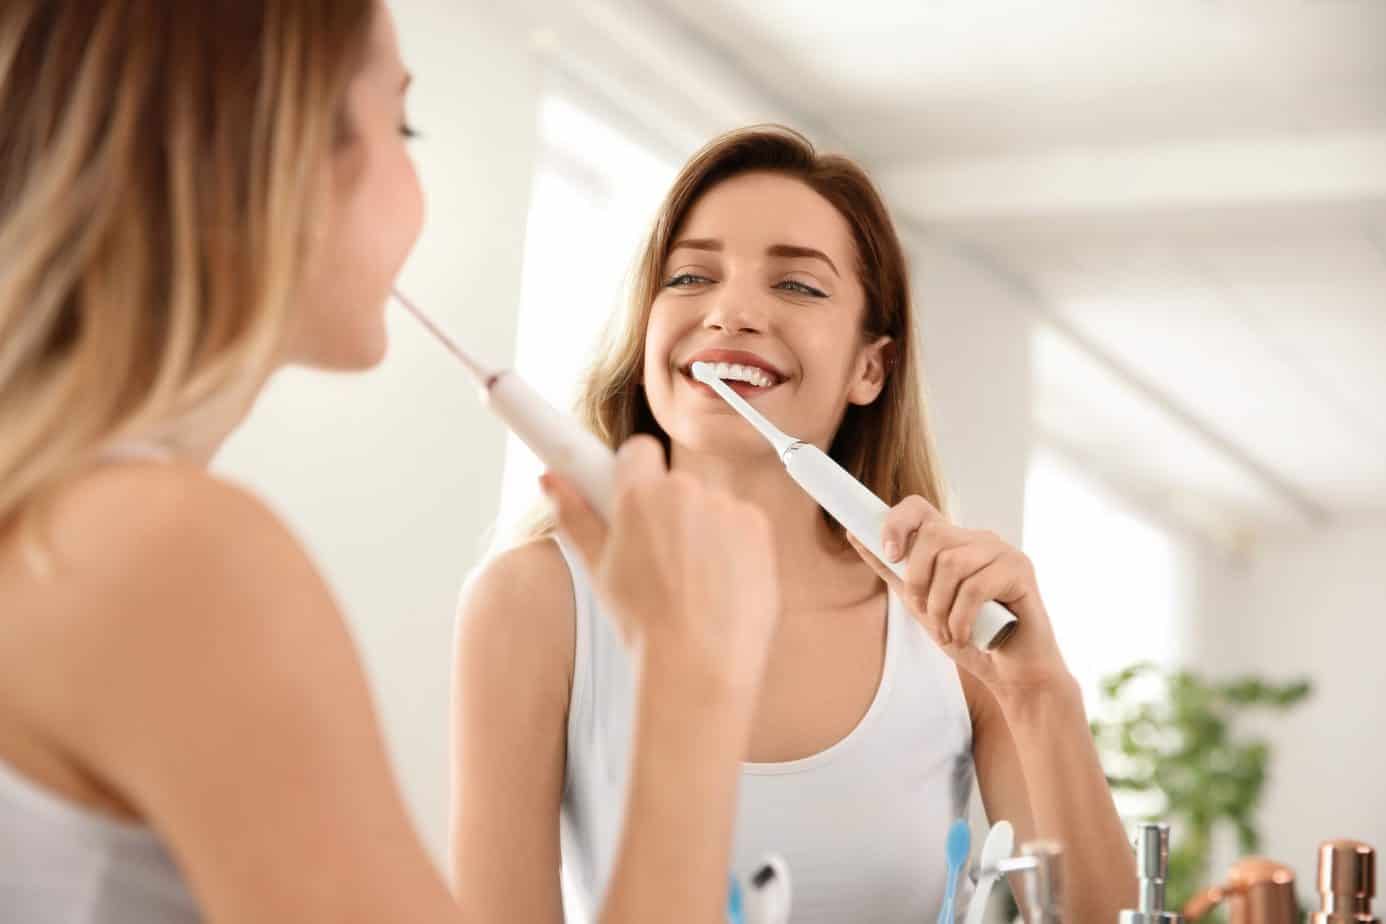 Are you sure you’re taking good care of your teeth? Learn the principles of good oral hygiene